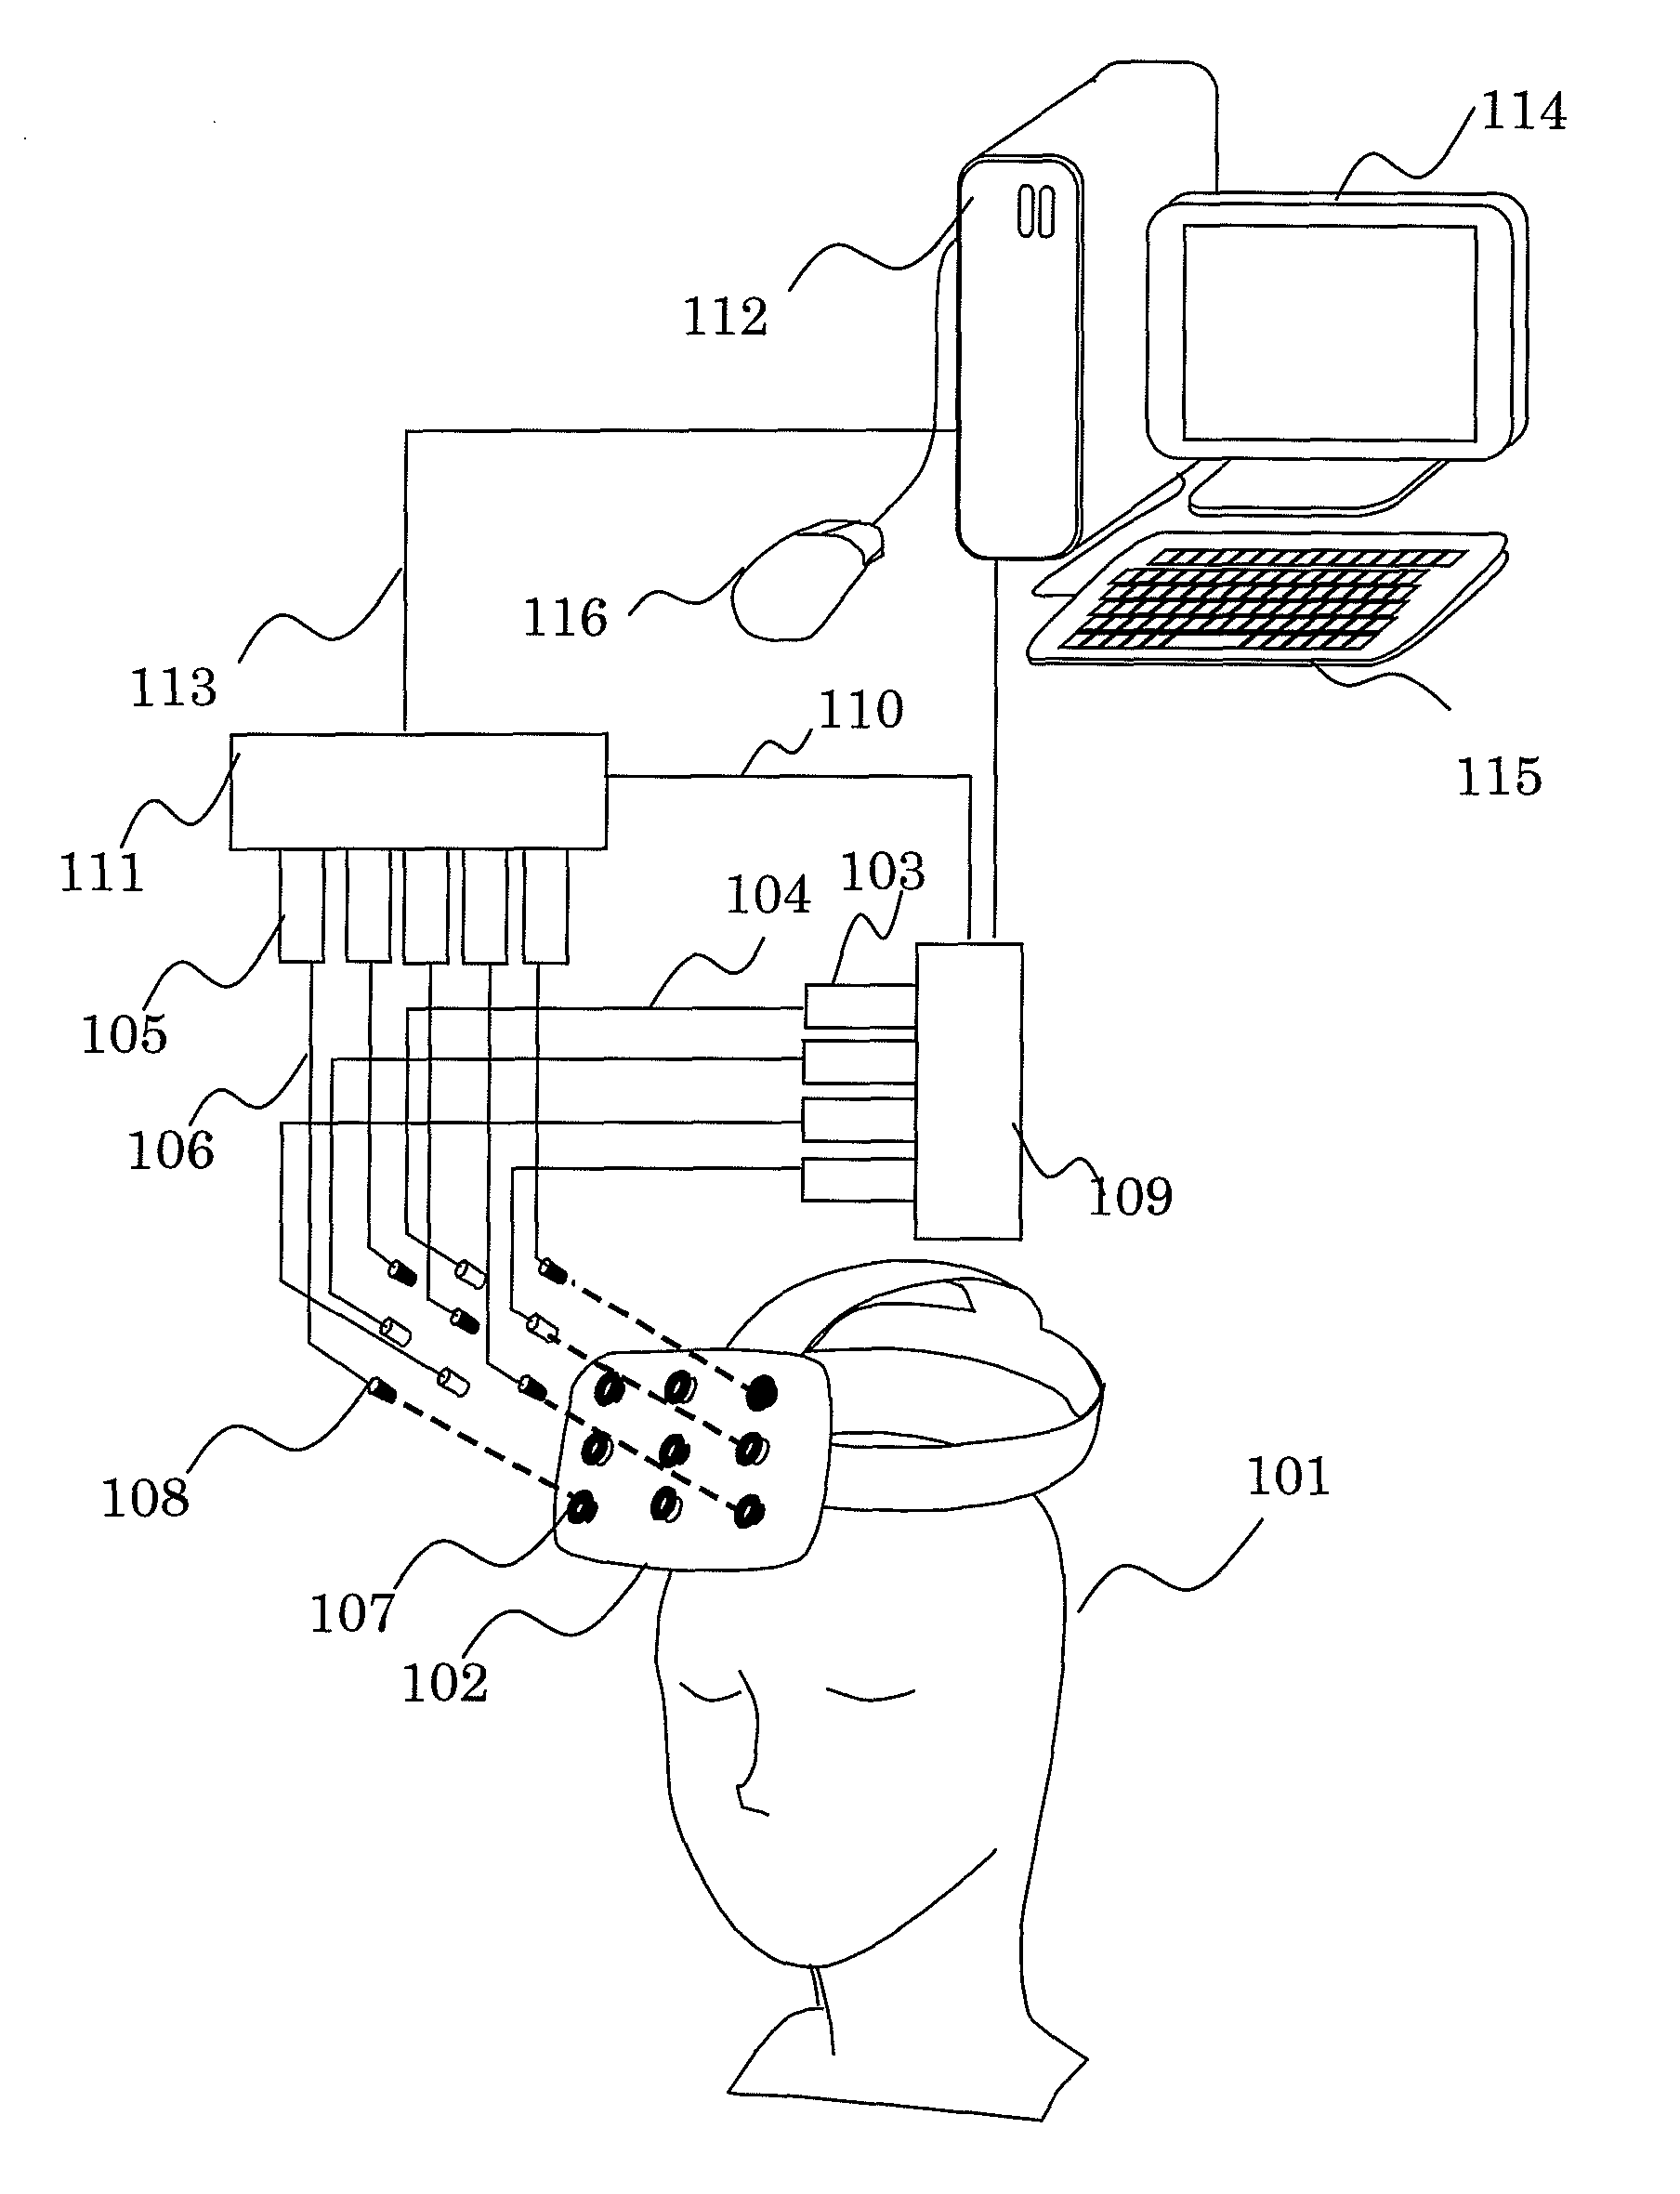 External condition control device based on measurement of brain functions